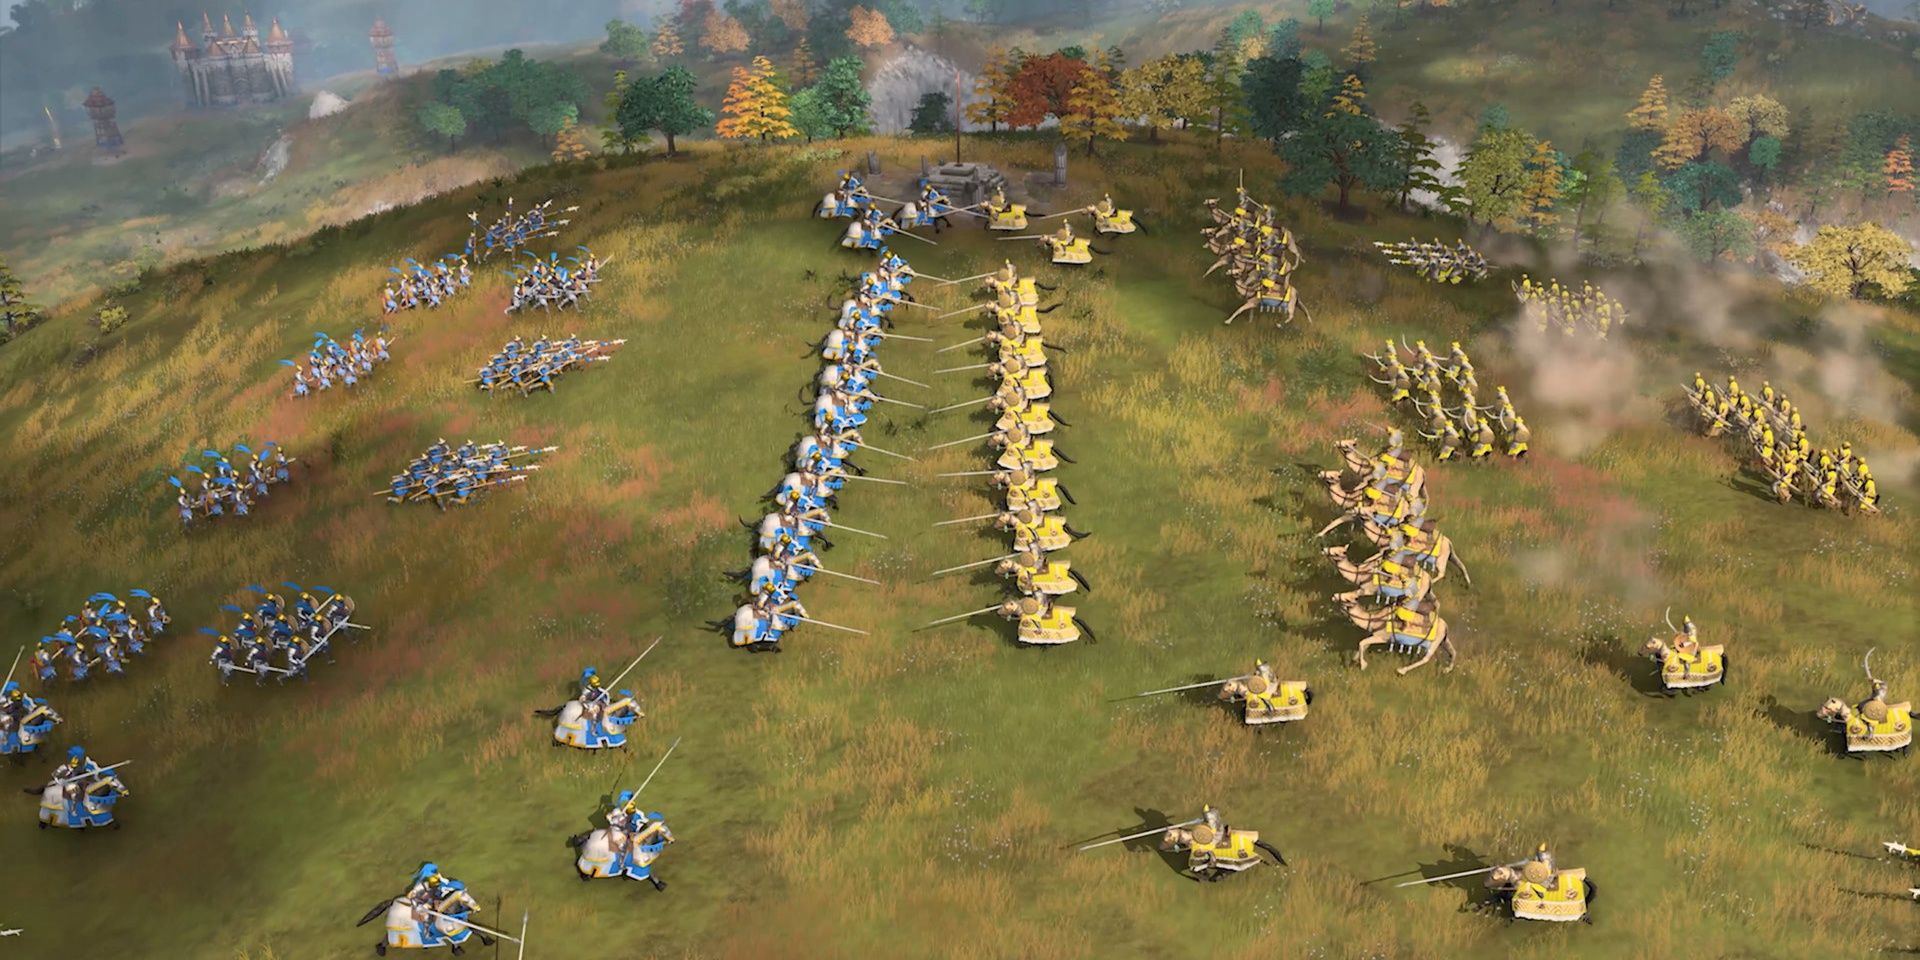 Pitched Battle Featuring Infantry & Cavalry From Age Of Empires 4